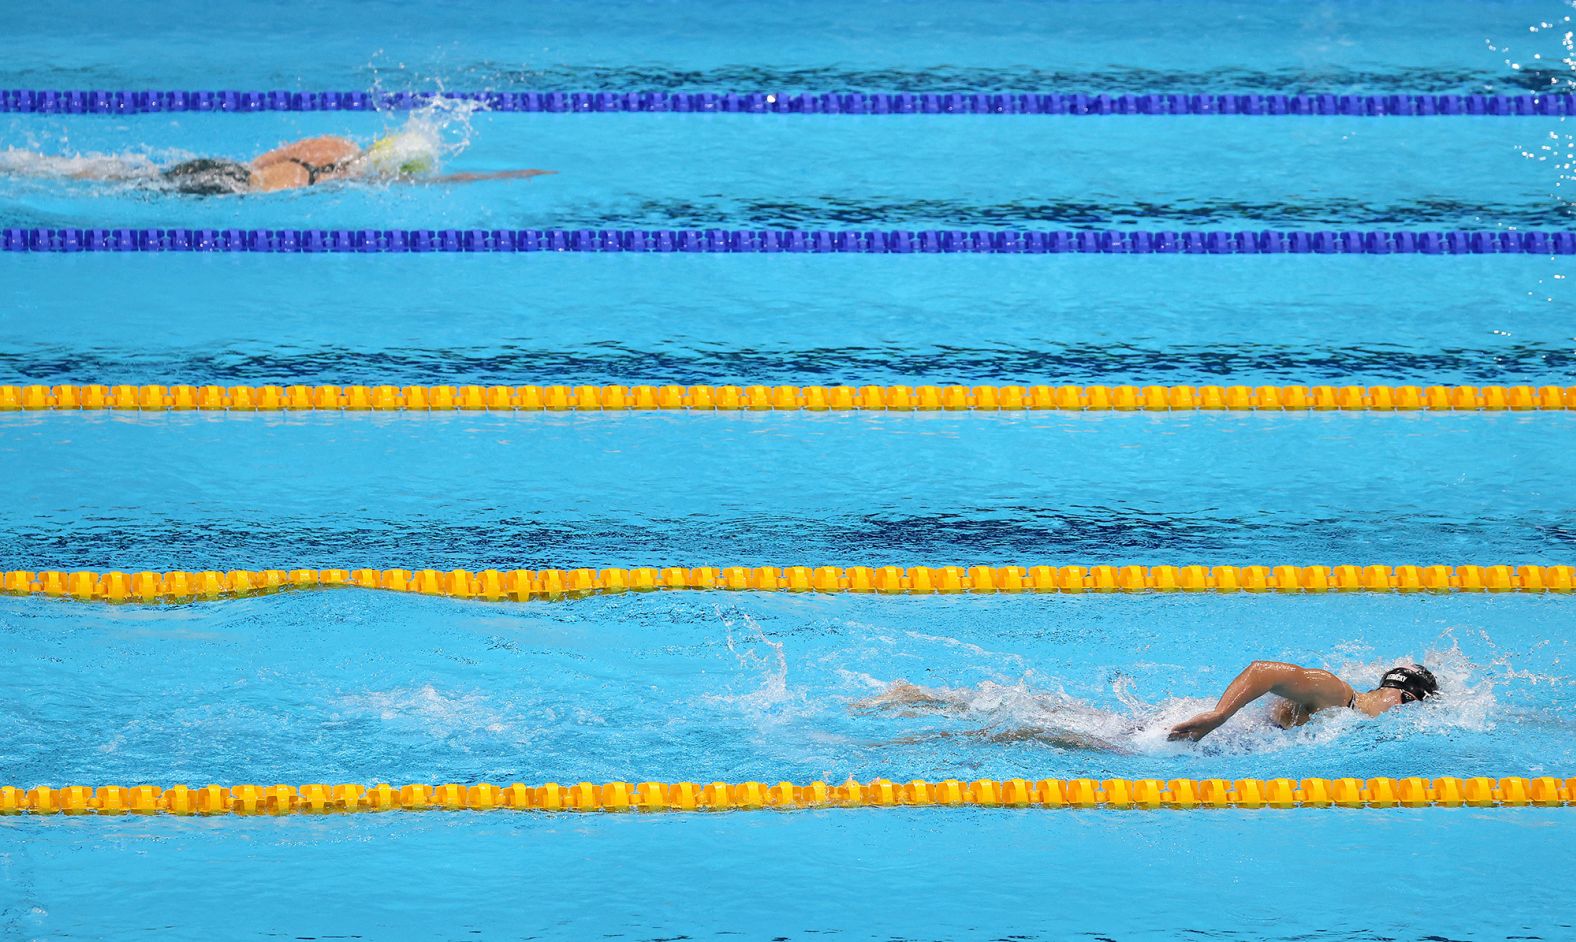 The United States' Katie Ledecky leads Australia's Ariarne Titmus during the 800-meter freestyle on July 31. <a href="index.php?page=&url=https%3A%2F%2Fwww.cnn.com%2Fworld%2Flive-news%2Ftokyo-2020-olympics-07-30-21-spt%2Fh_54e2fe78b366440913795bbeafb5f449" target="_blank">Ledecky won the event for the third straight Olympics.</a> Titmus took the silver.